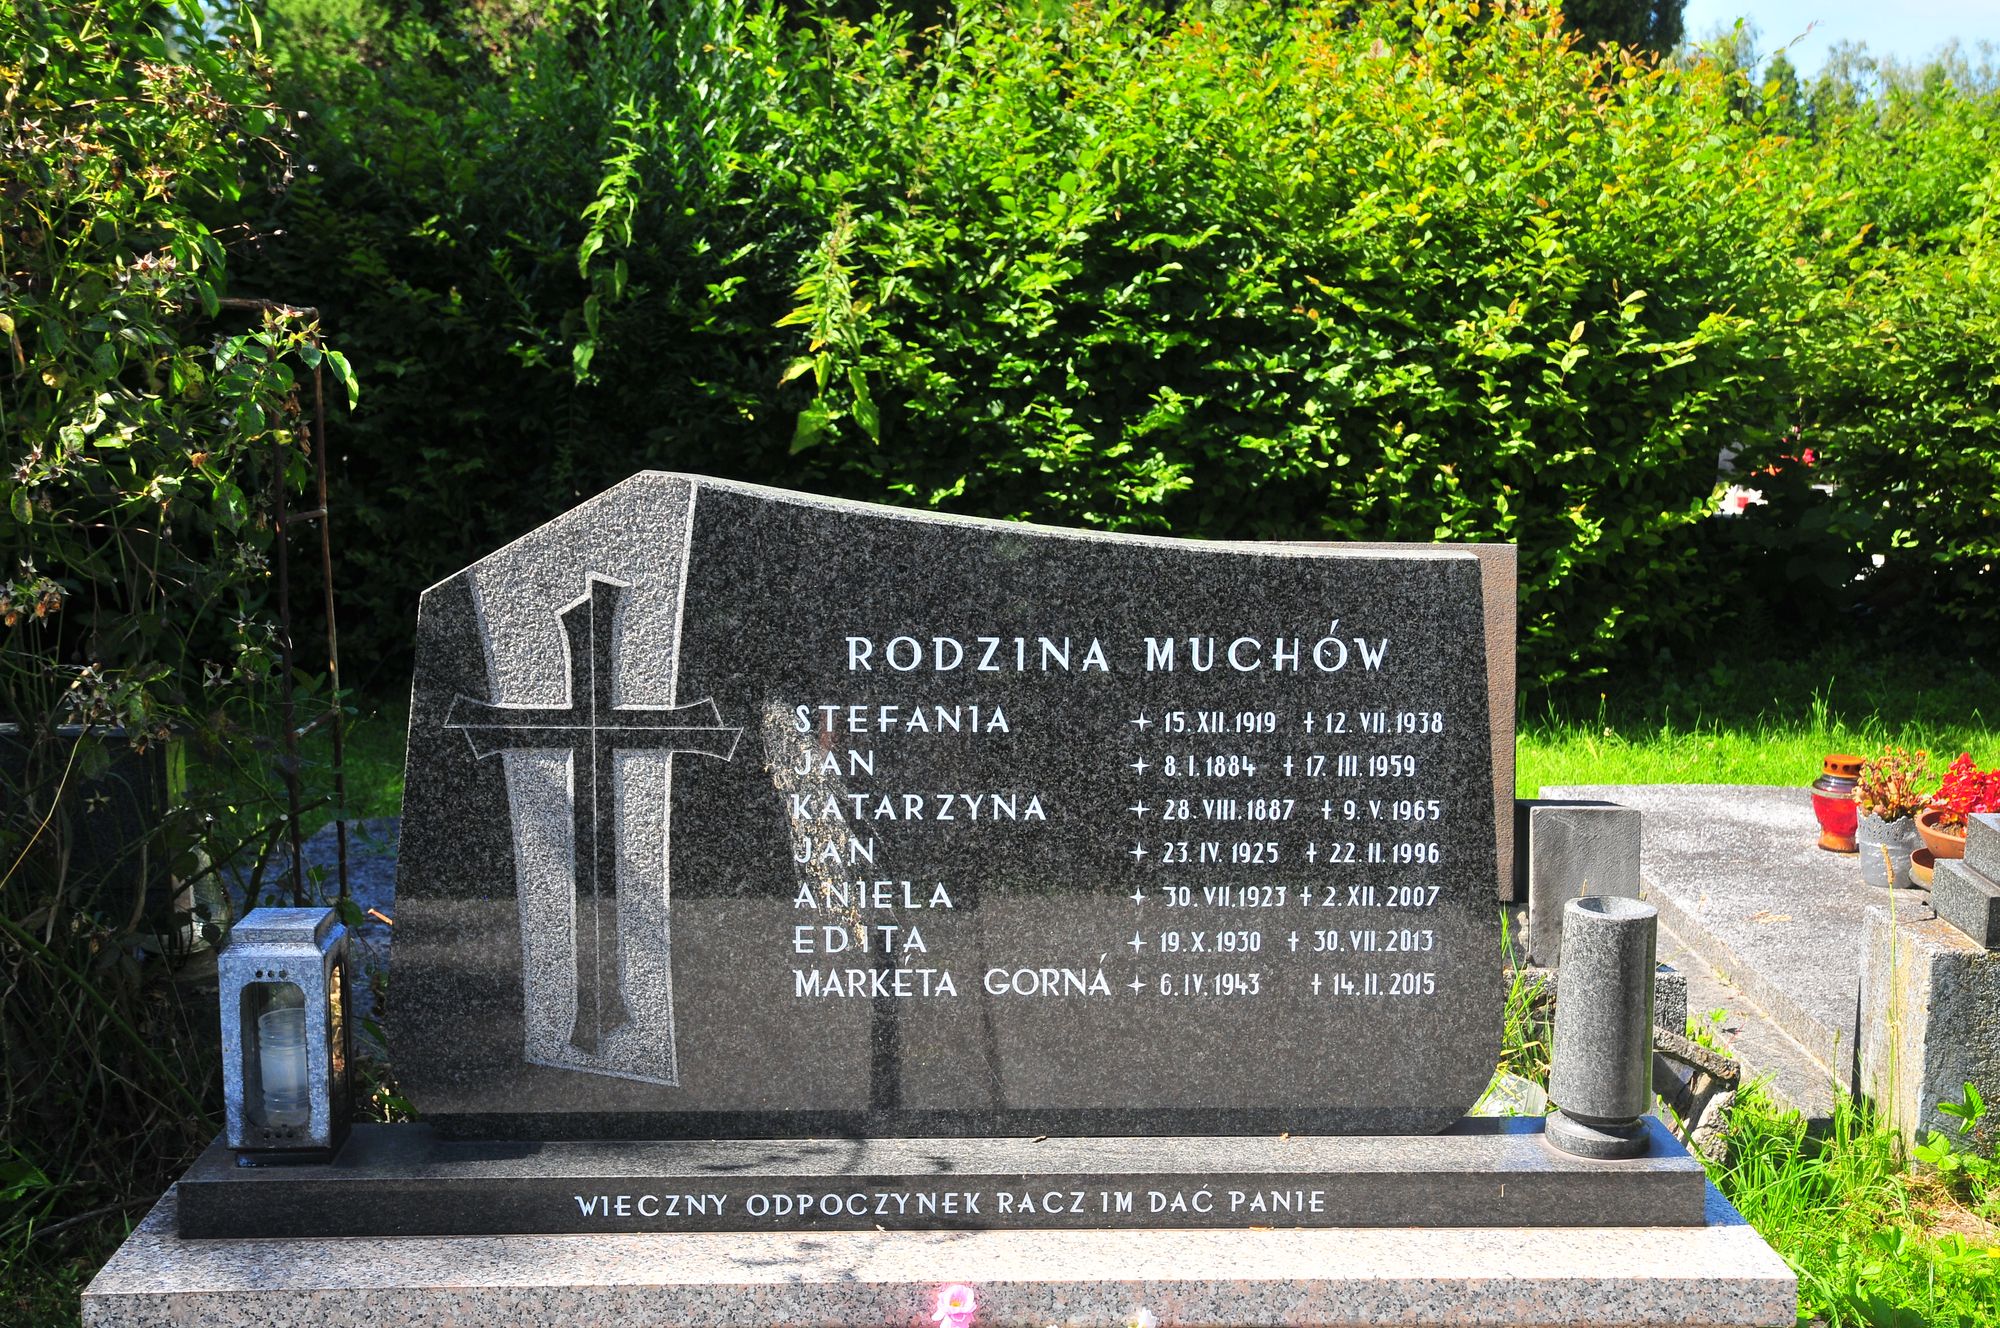 Tombstone of the Mucha family